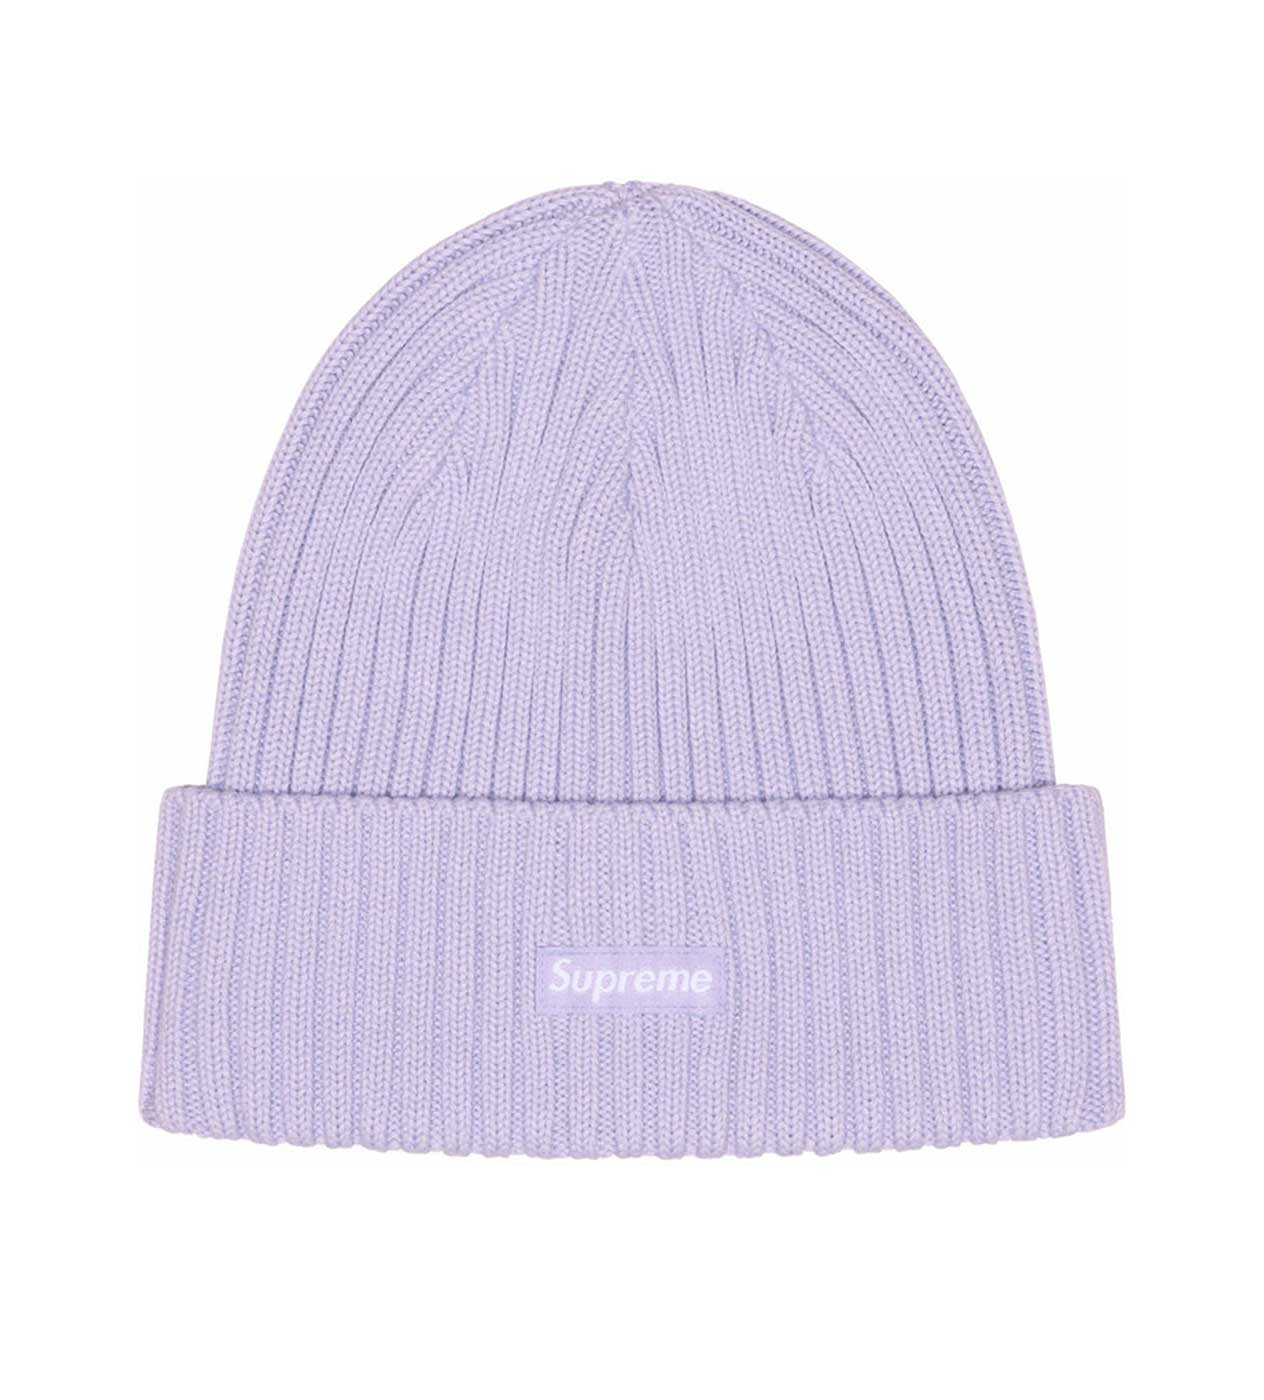 Supreme Overdyed Beanie Lavender Front